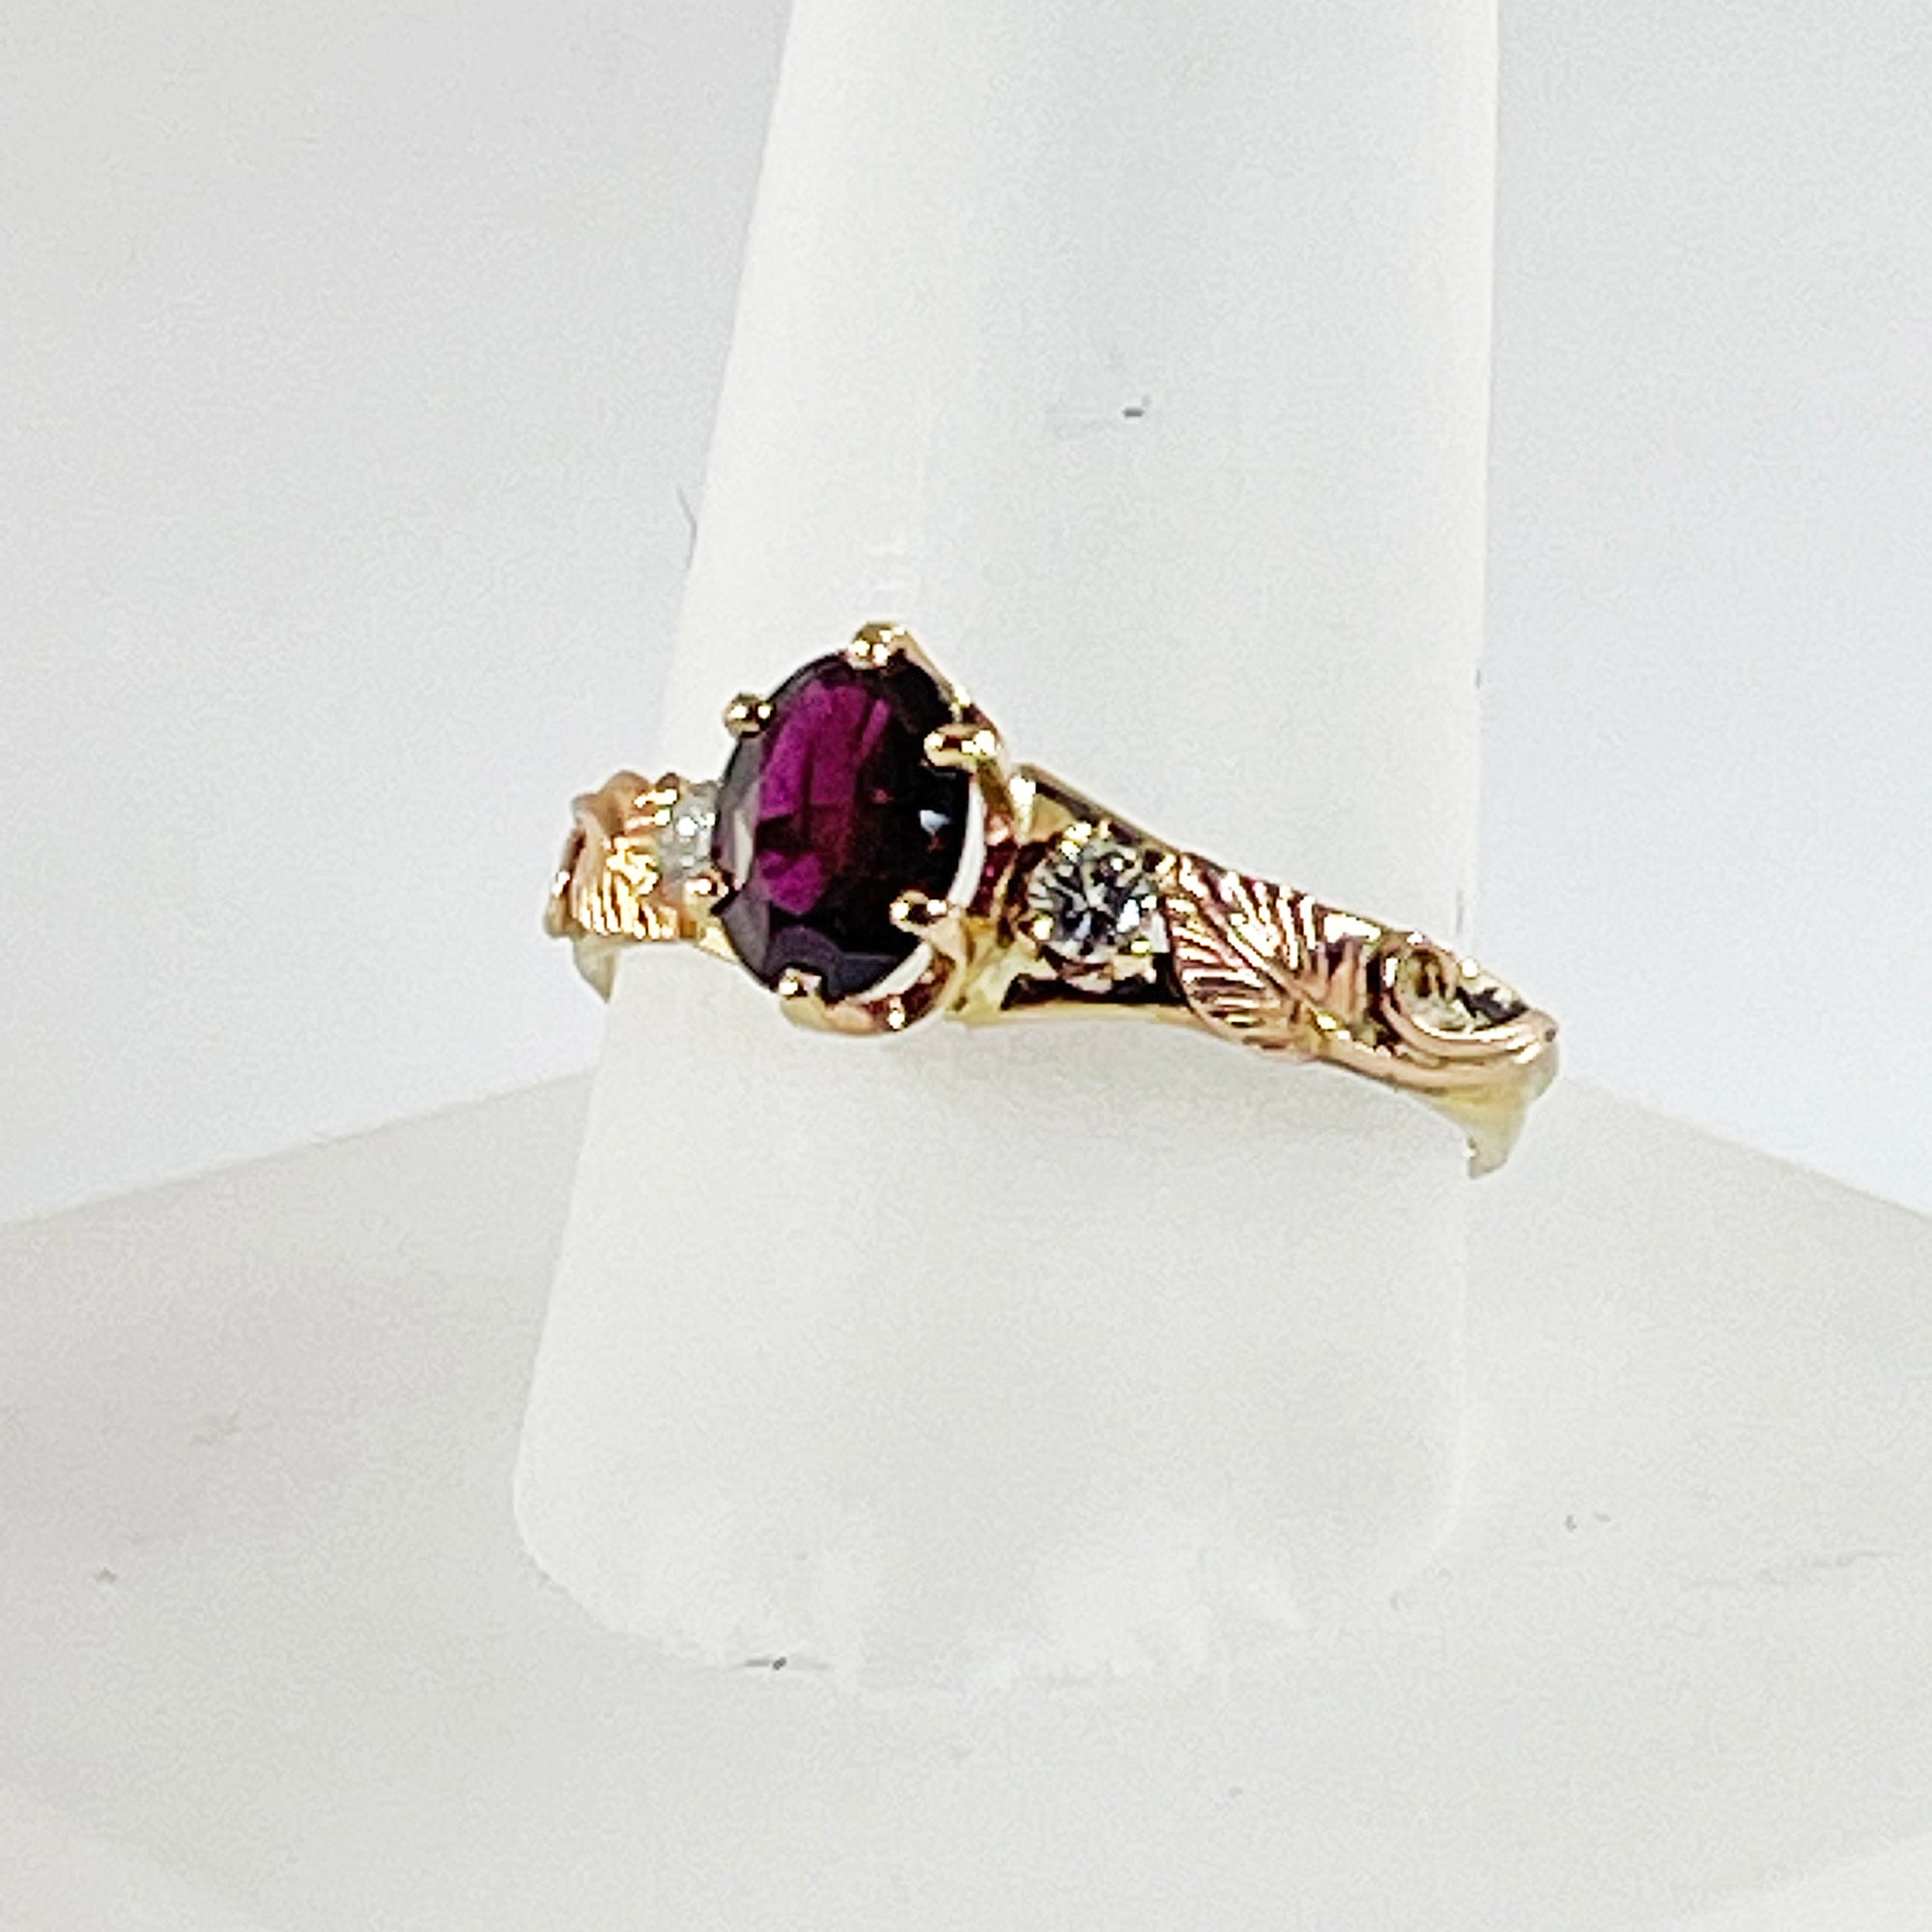 Cole Sheckler Ring - Pyrope Garnet with Diamonds in 14kt Yellow Gold w/ Rose Gold Leaves